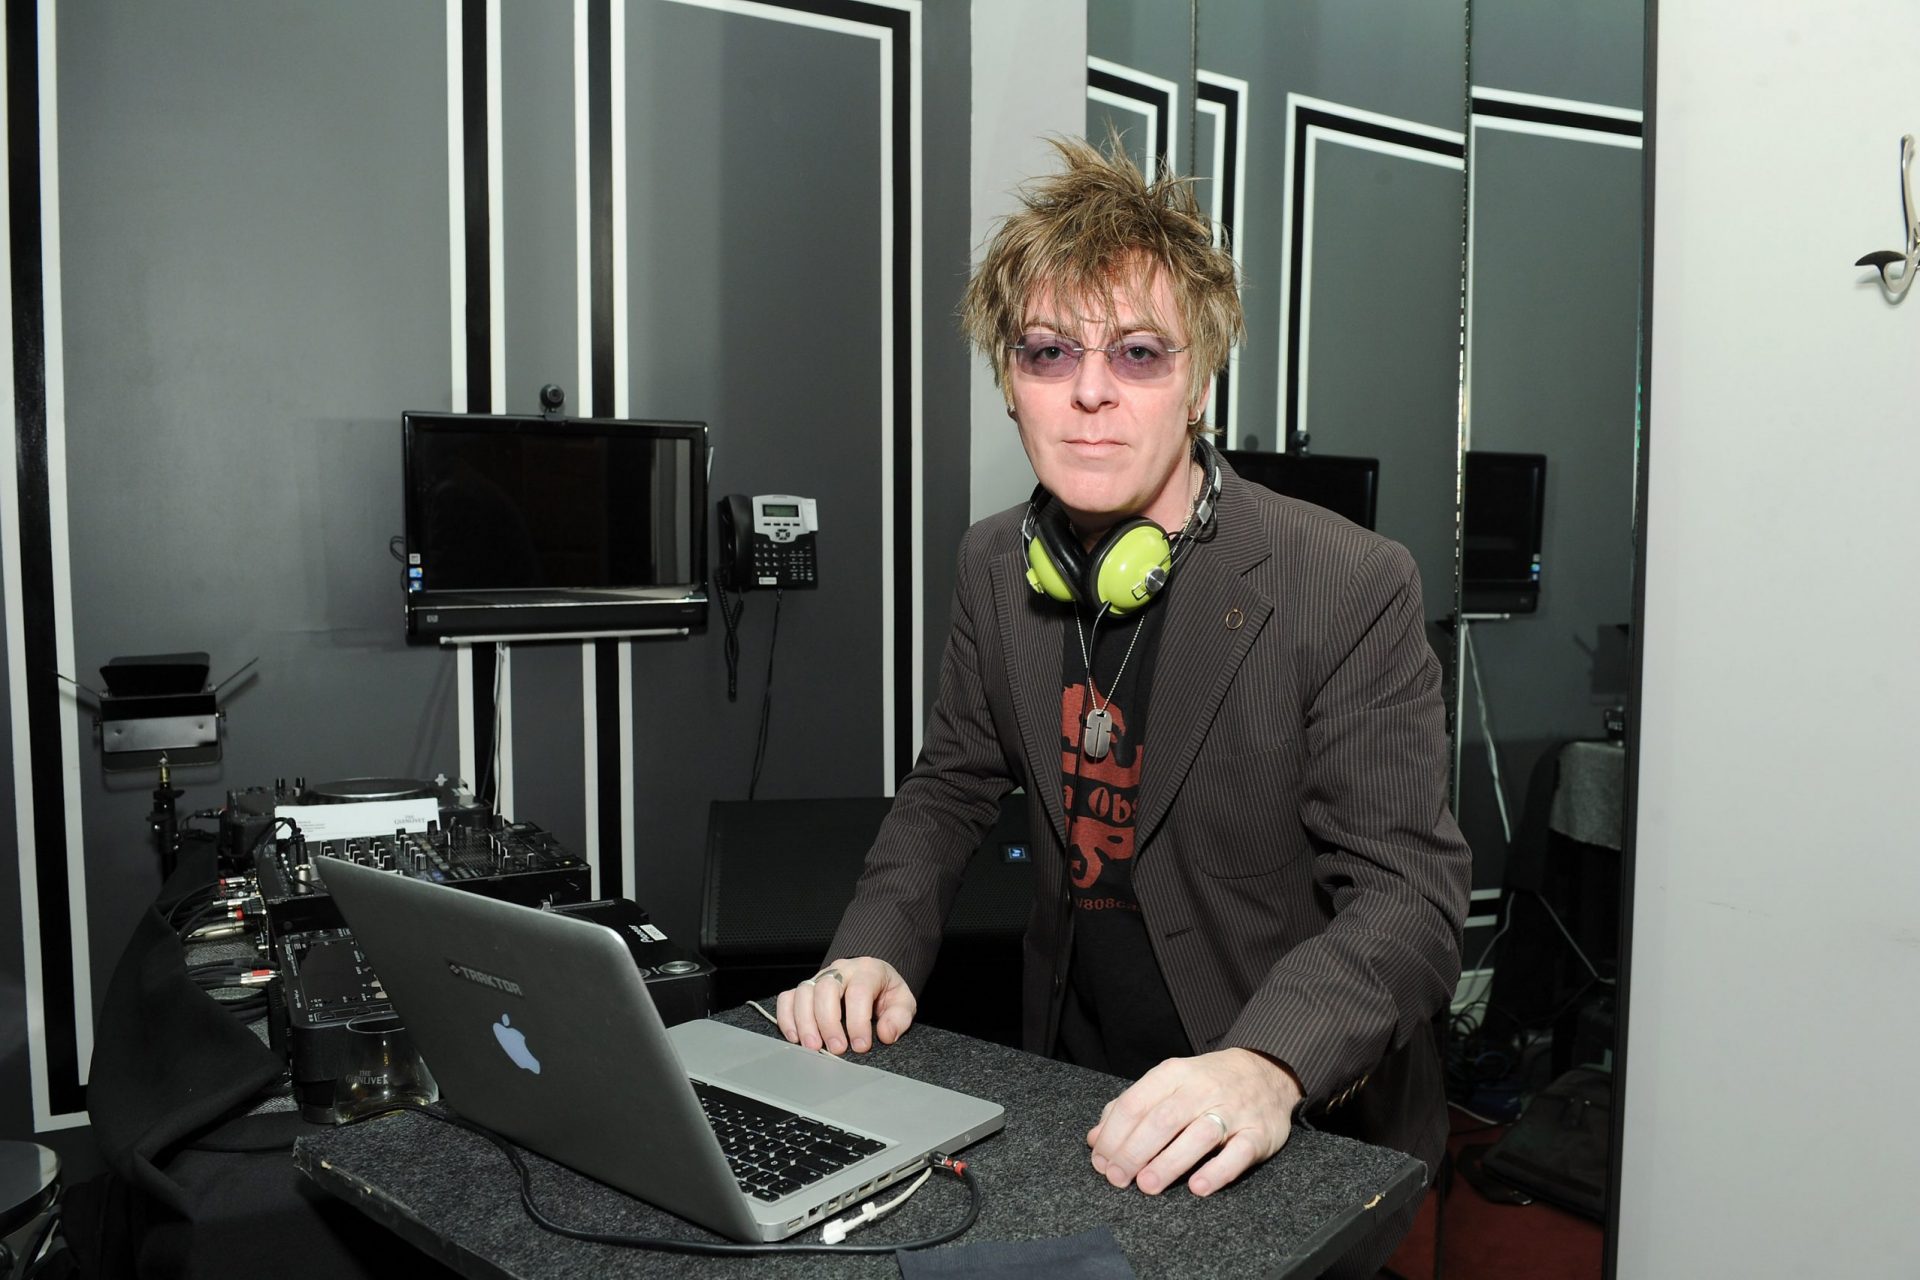 Andy Rourke – May 19